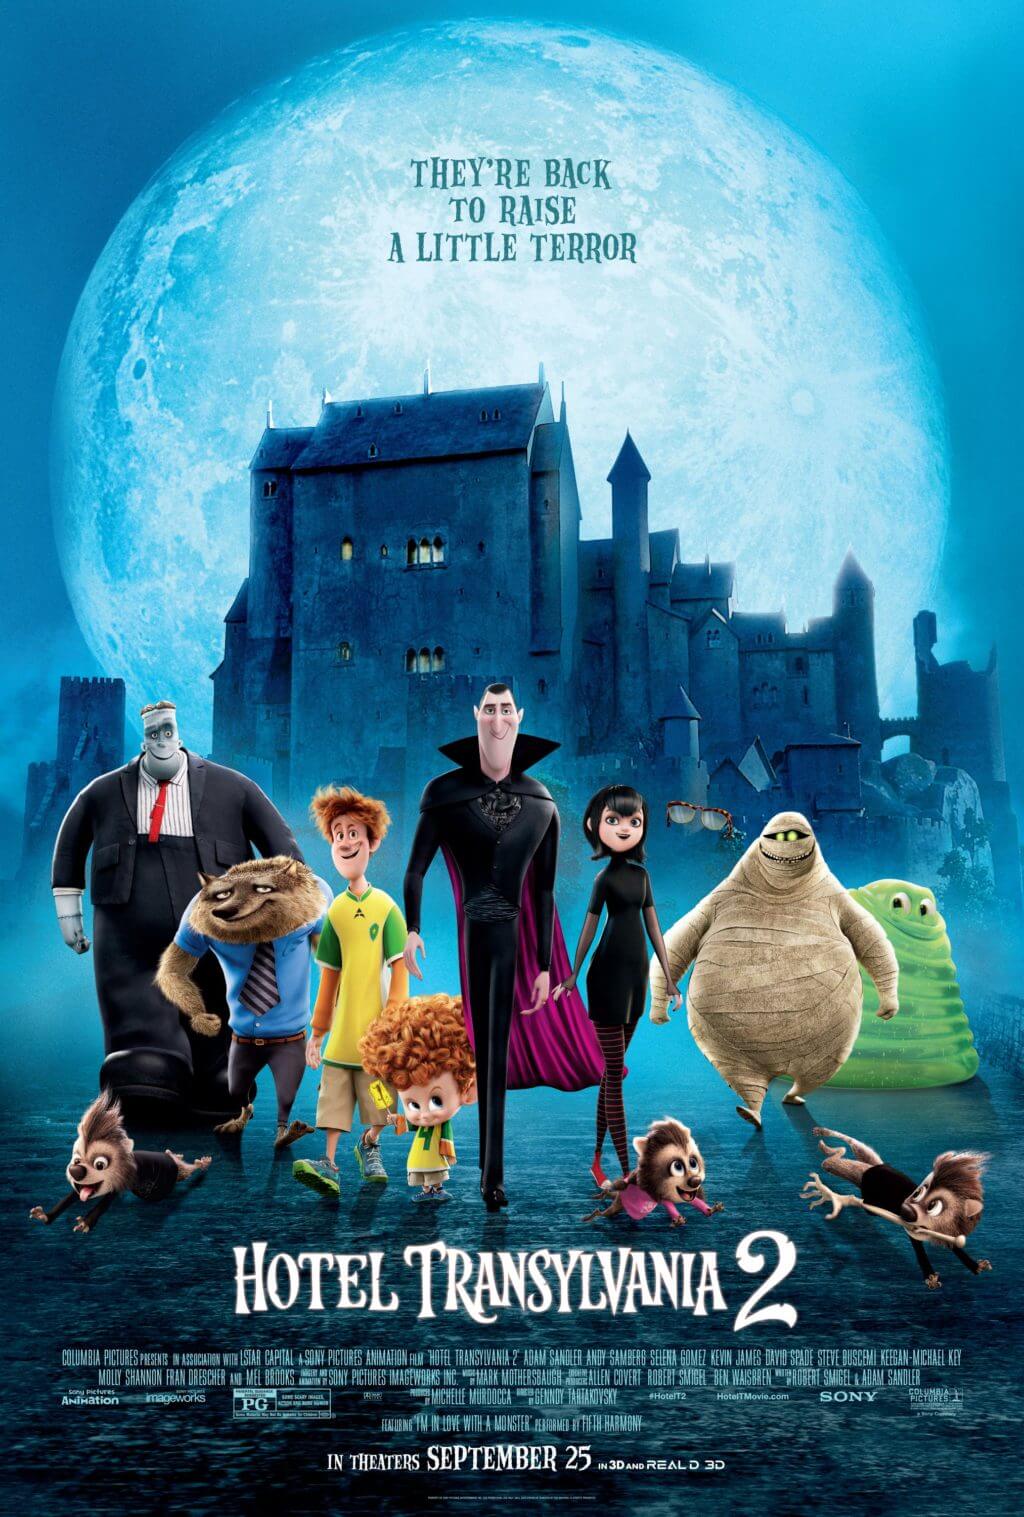 Win a Movie Prize Pack for Hotel Transylvania 2! #HotelT2 #ad | The TipToe Fairy